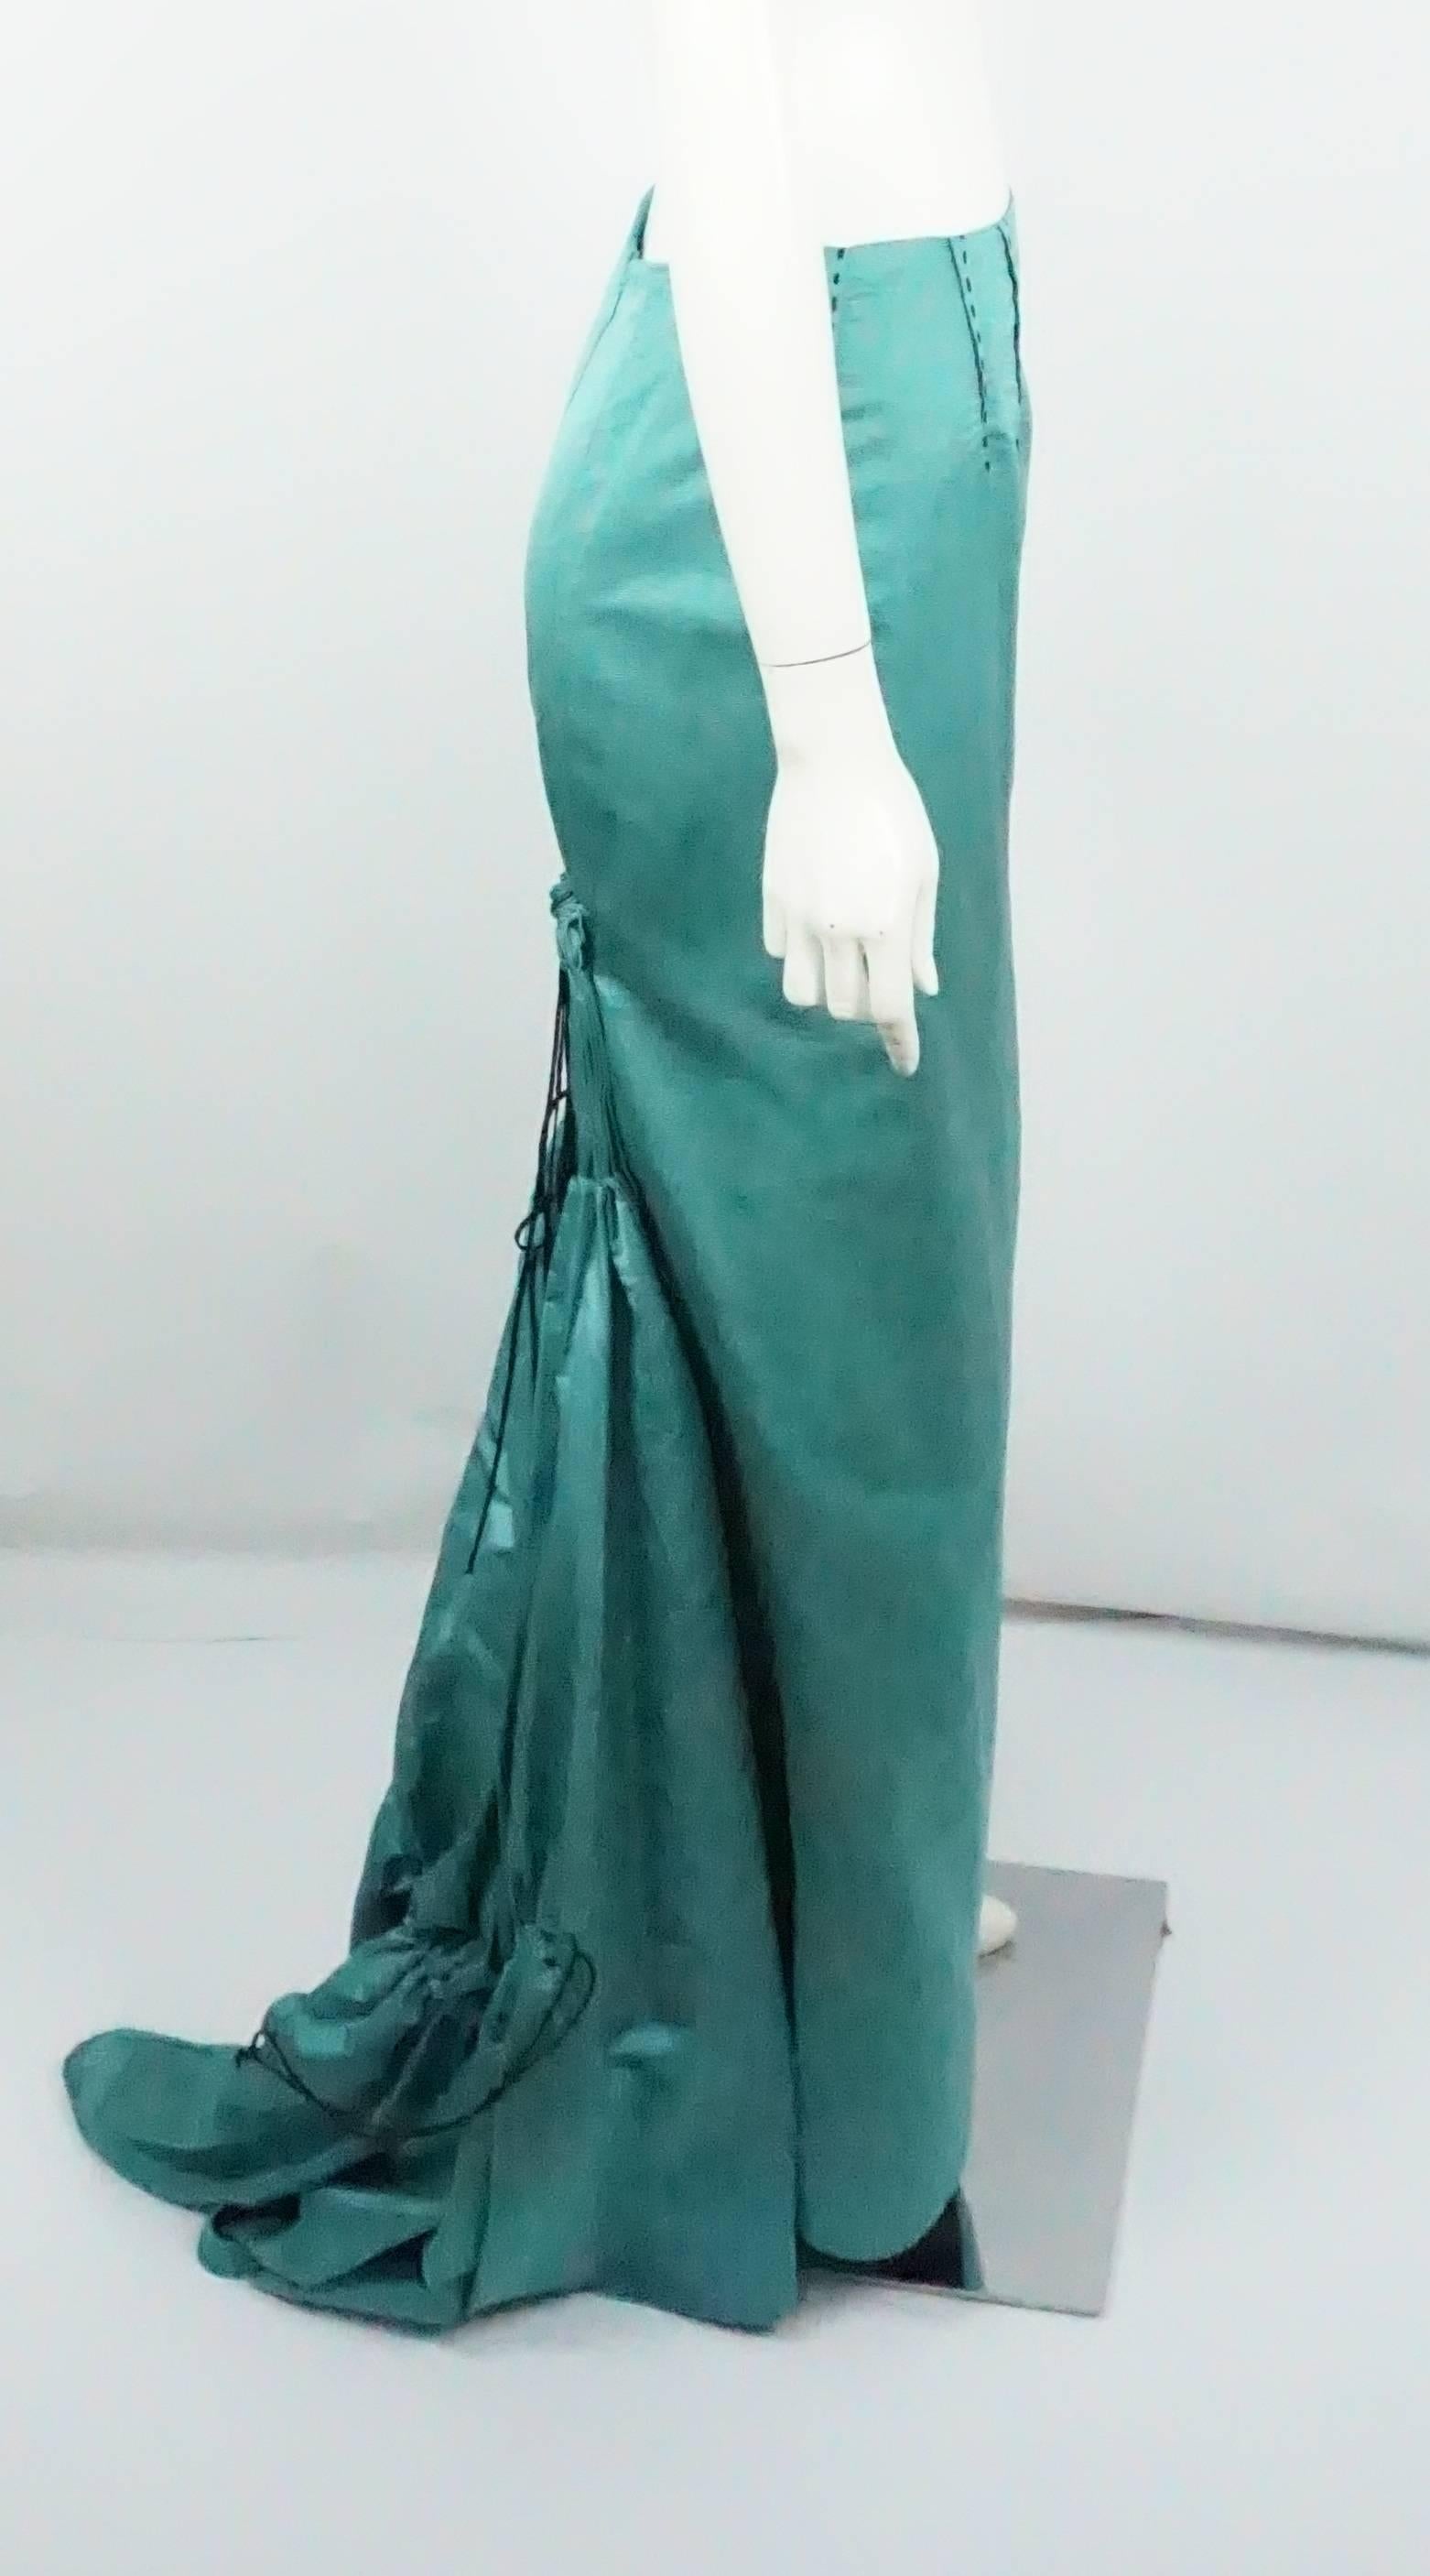 Carolina Herrera Teal Silk Faille Long Skirt - 6 - NEW  This beautiful teal silk faille maxi evening skirt is fitted along the front with 4 tucks in the front with black silk ribbon stitching detail, it has a back zipper. The back of the skirt has a